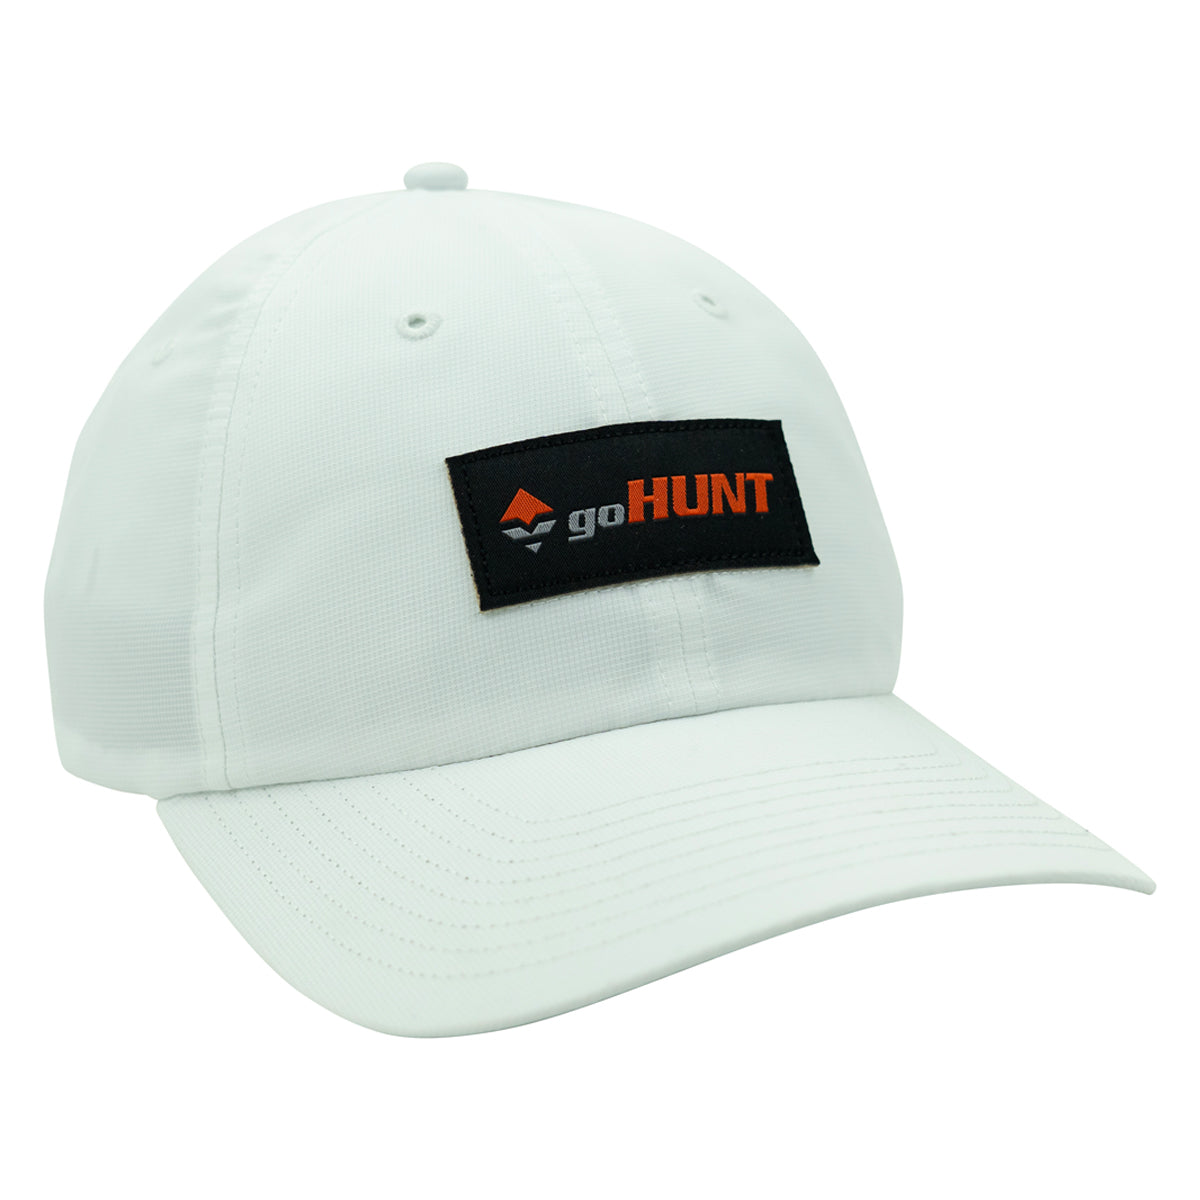 The Dad Hat in The Dad Hat by goHUNT | Apparel - goHUNT Shop by GOHUNT | GOHUNT - GOHUNT Shop